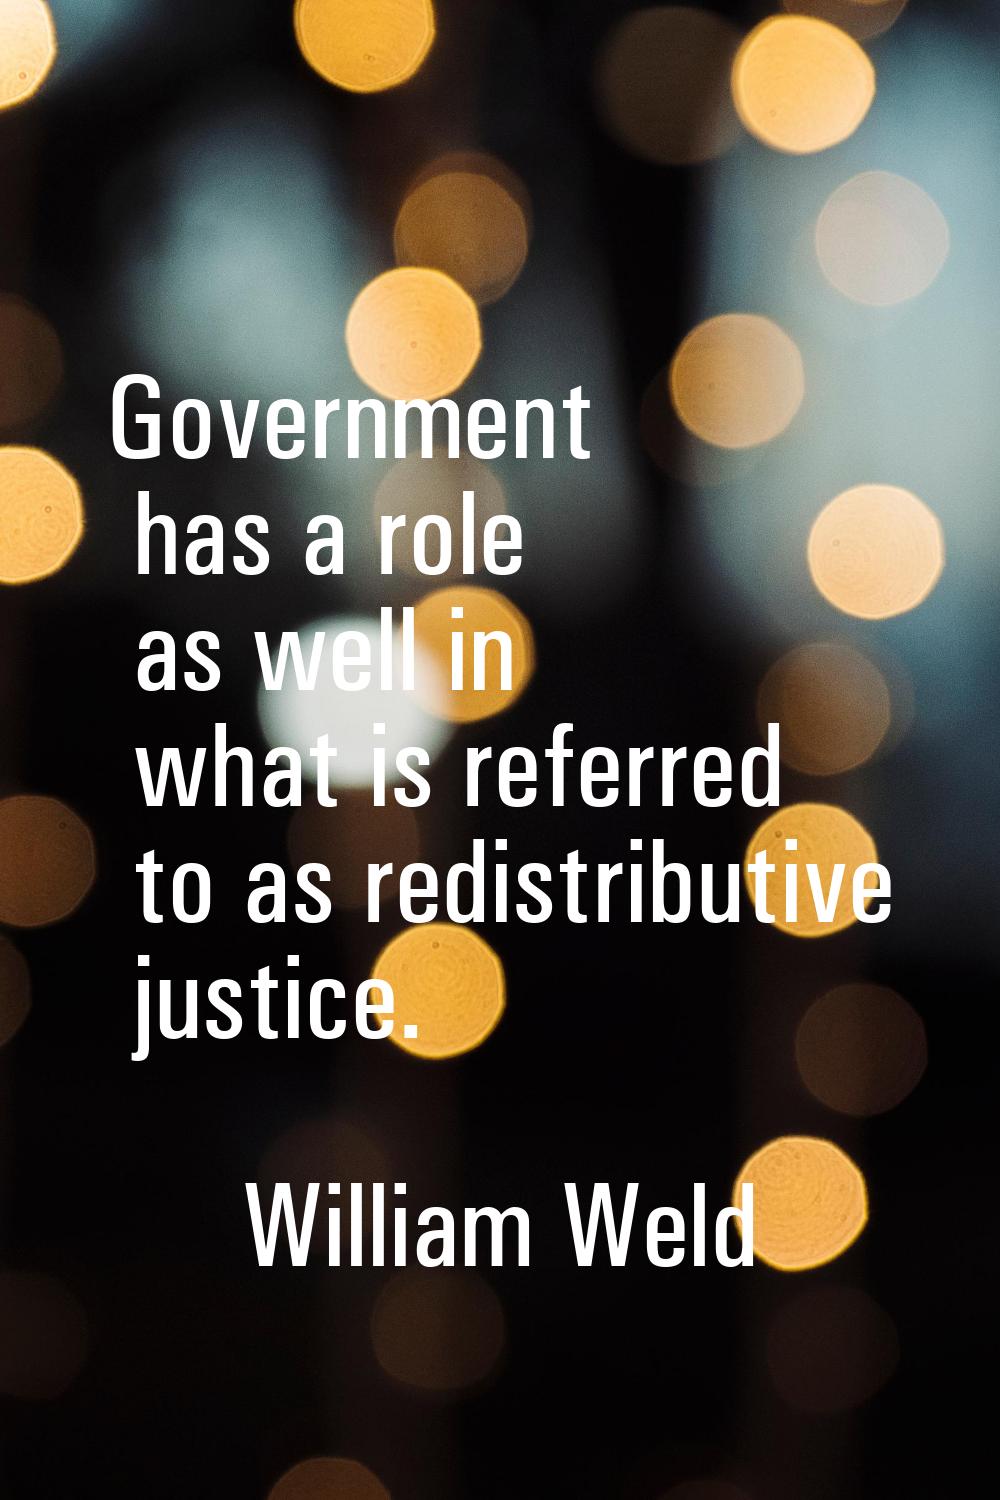 Government has a role as well in what is referred to as redistributive justice.